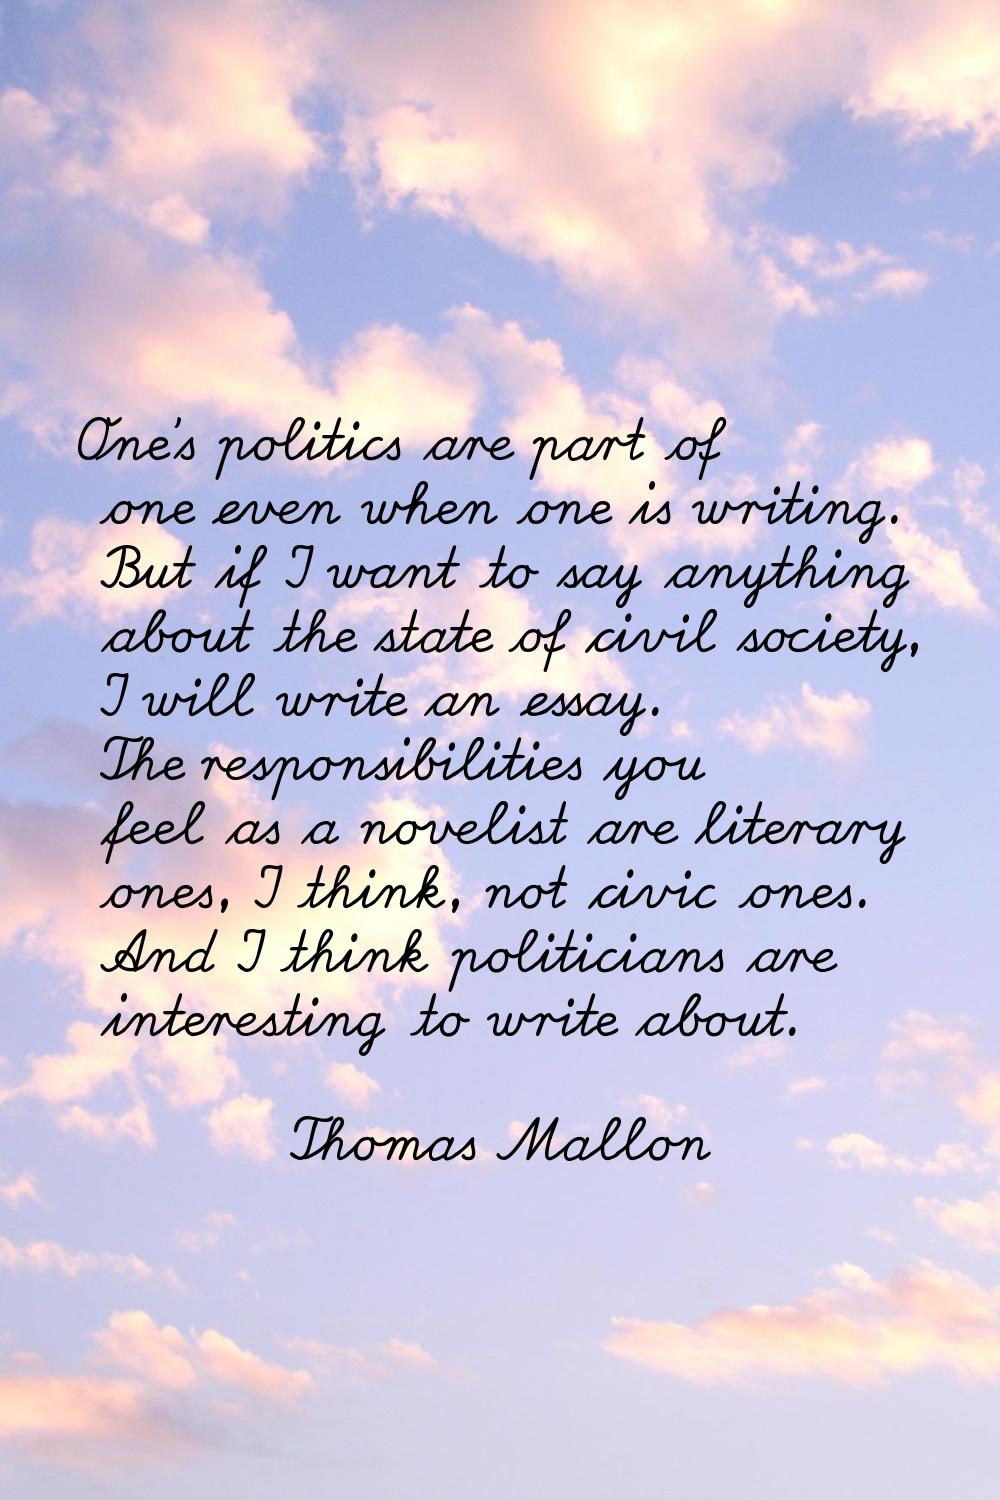 One's politics are part of one even when one is writing. But if I want to say anything about the st